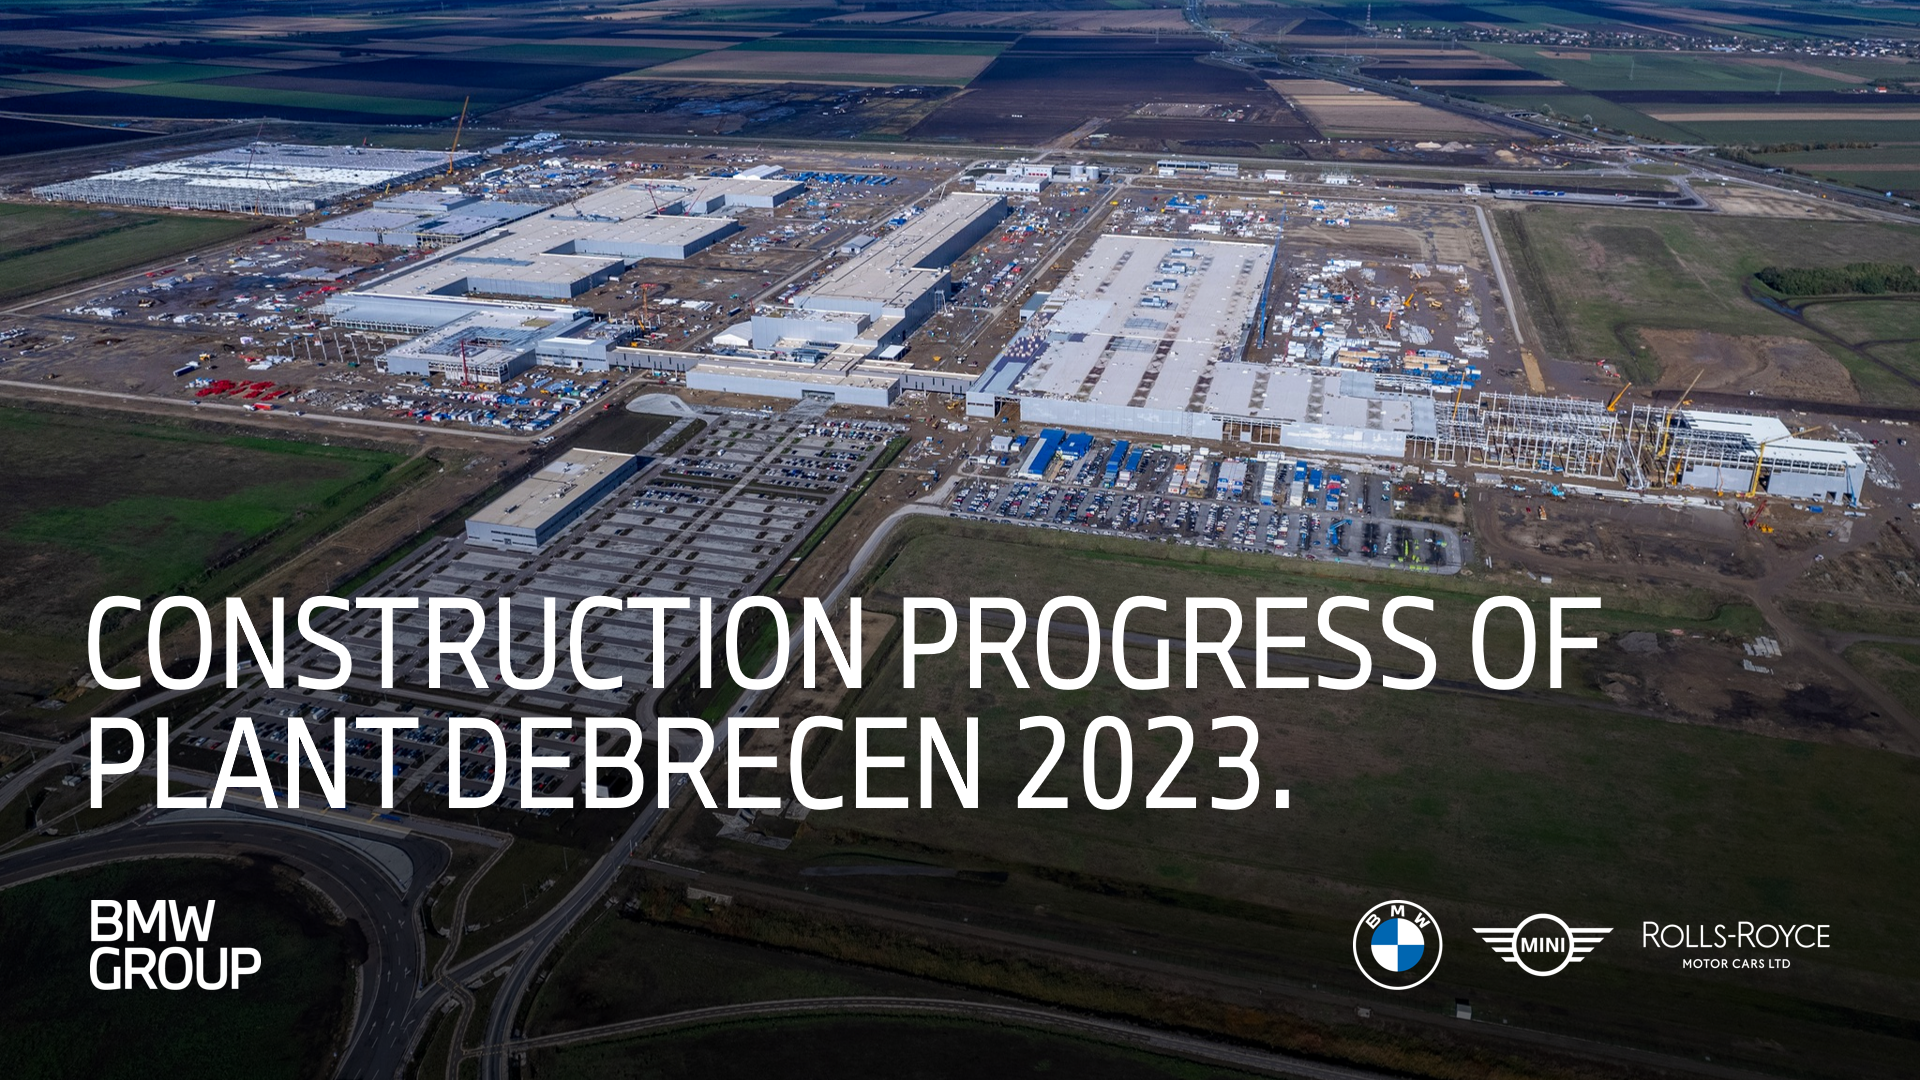 The video shows the progress of construction works in Plant Debrecen.